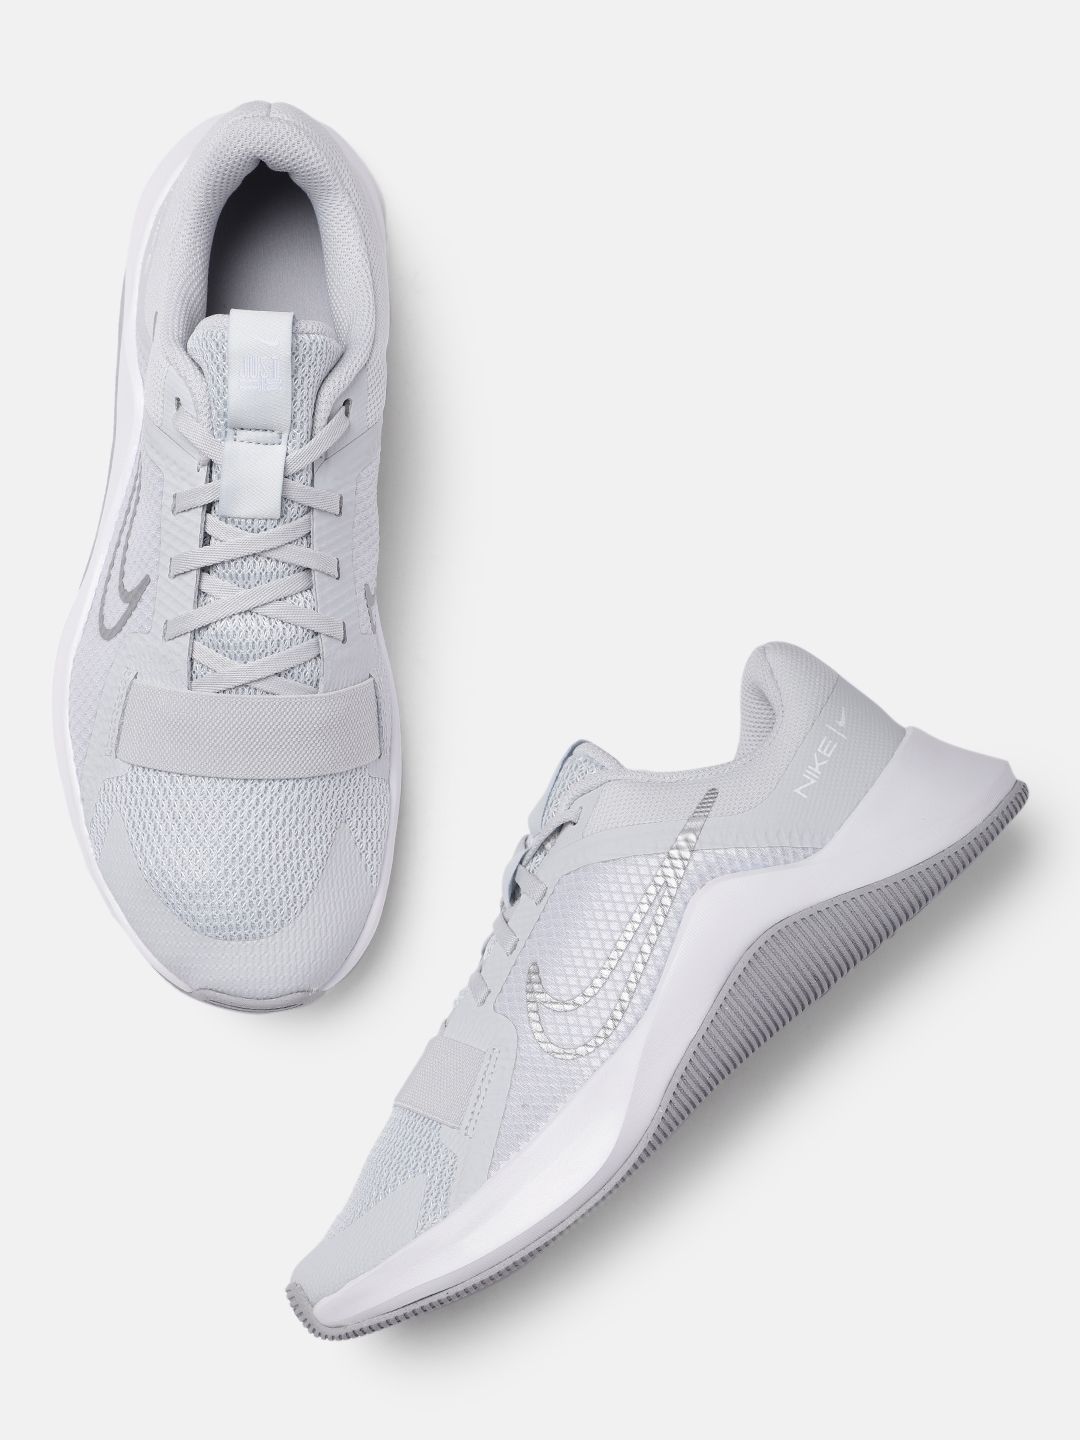 Nike Women Grey MC TRAINER 2 Training or Gym Shoes Price in India